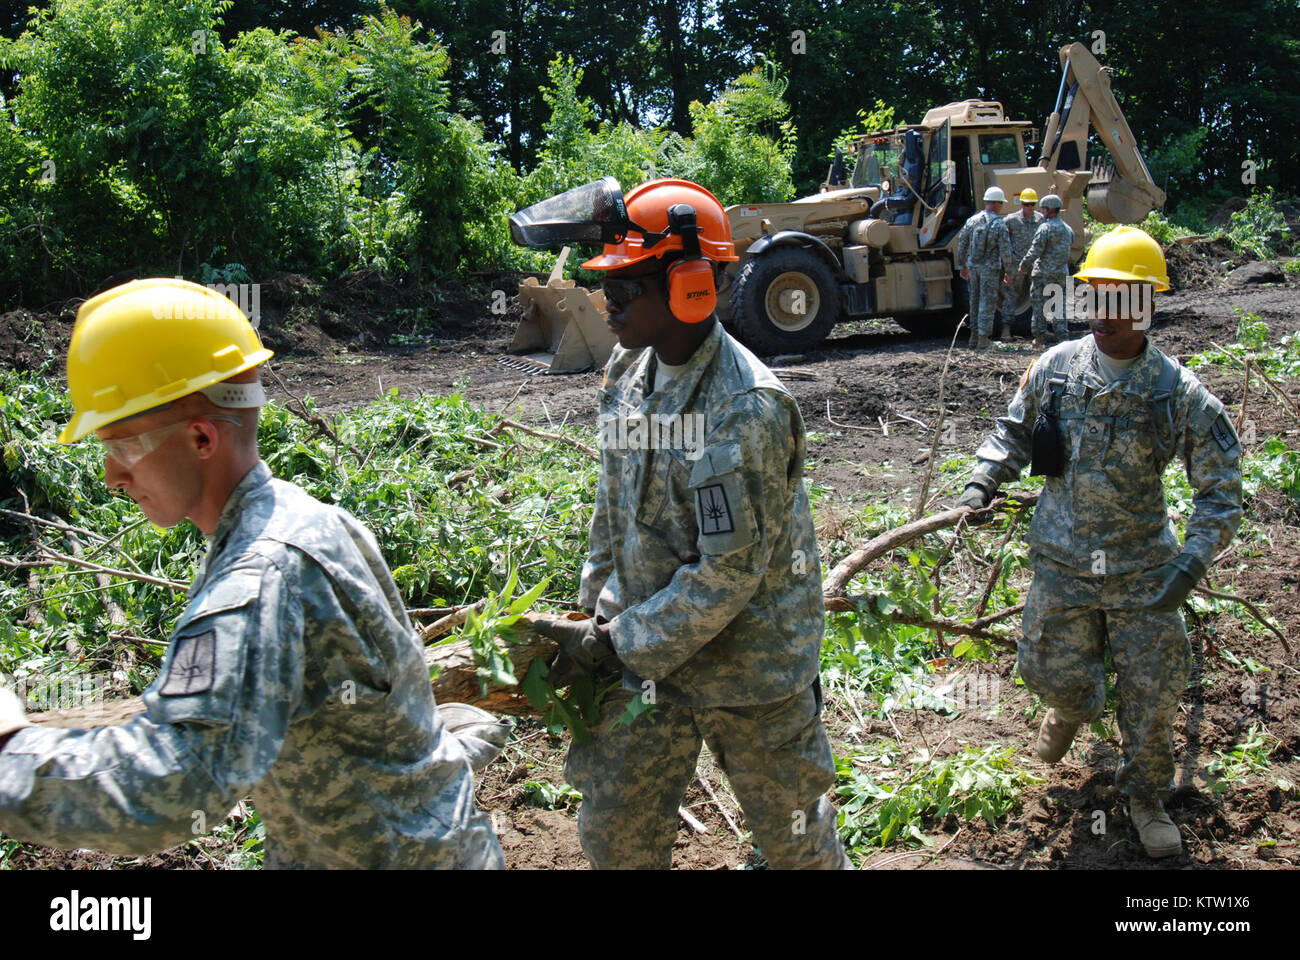 COHOES, N.Y. - Soldiers from New York Army National Guard's 1156th Engineer Battalion and 152nd Engineer Company leveled trees and removed tons of underbrush in the ruins of the Erie Canal located in the center of the City of Cohoes on June 11 as part of a trail-clearing process. The Soldiers were conducting innovative readiness training as part of their Annual Training.  Photo by Sgt. 1st Class Steven Petibone, New York Army National Guard Stock Photo